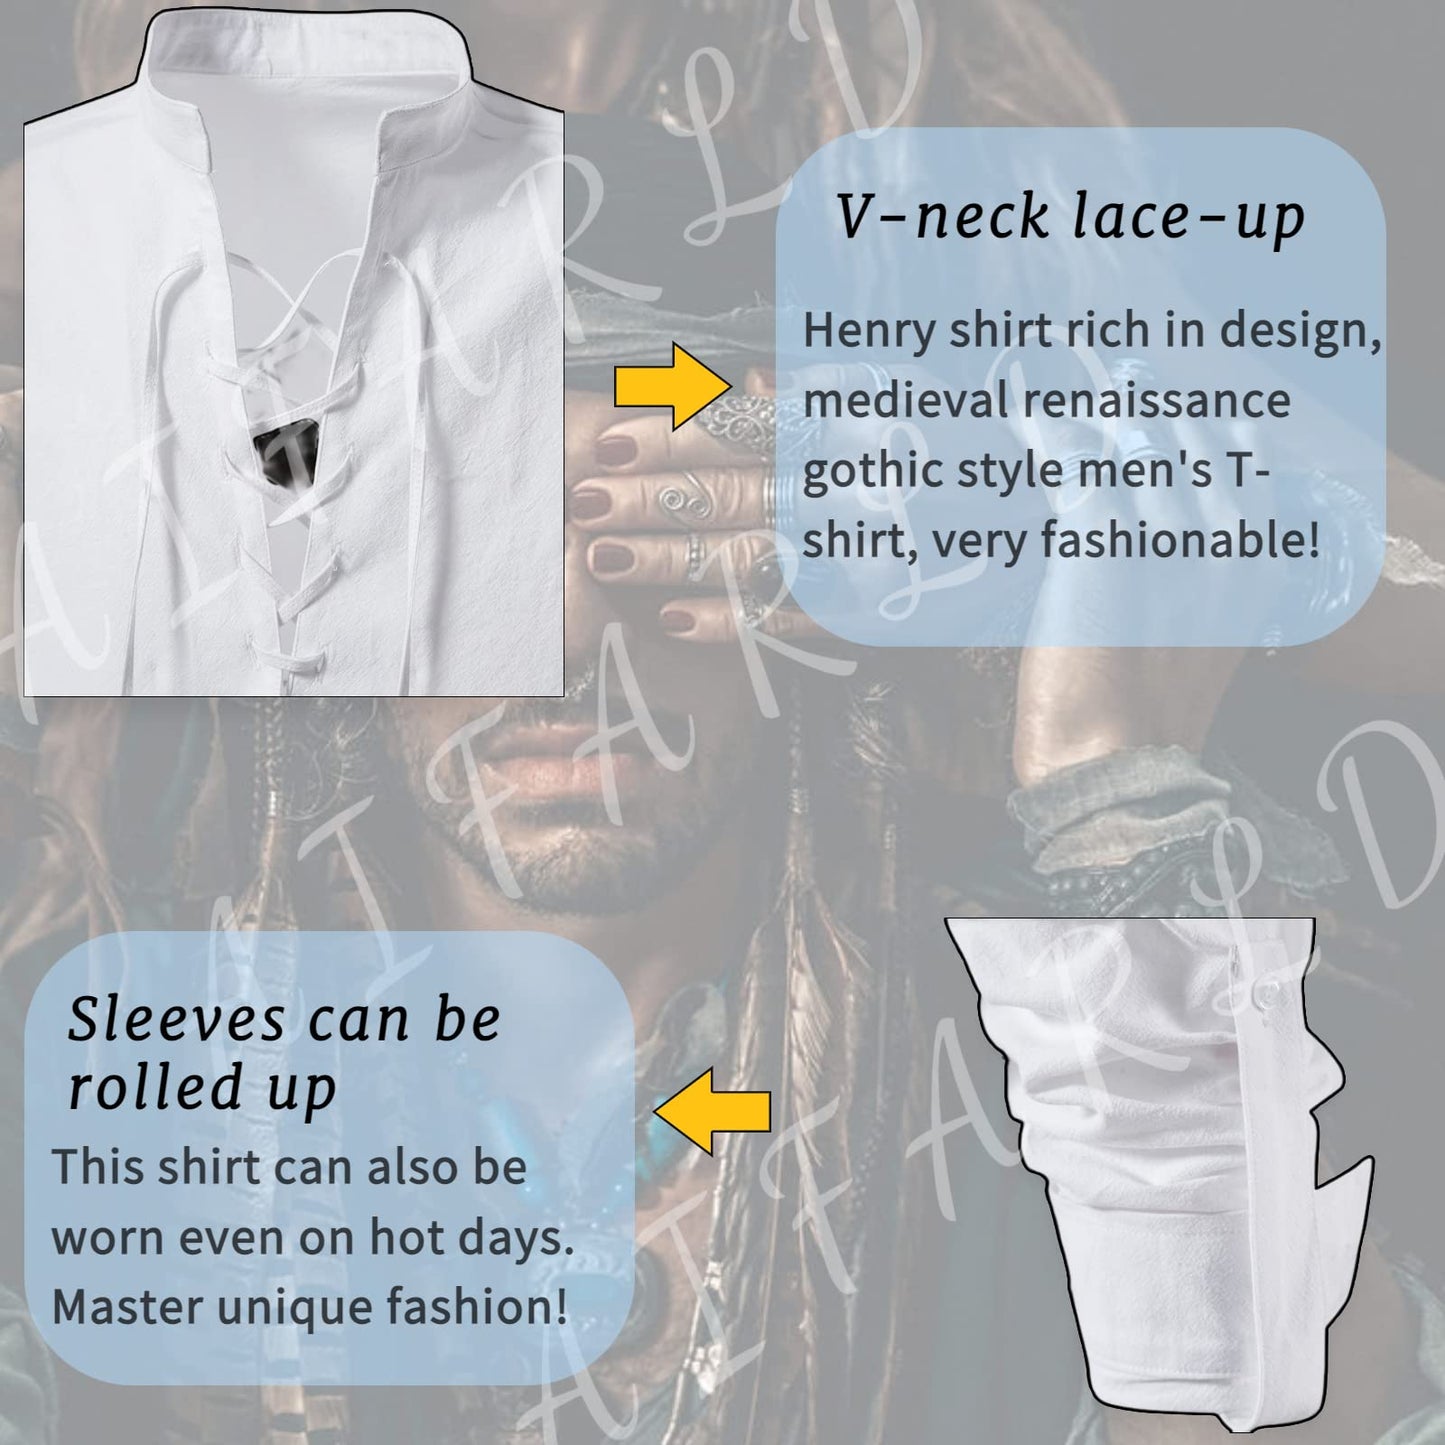 Men's Long Sleeve Shirts Retro Style Lace up for Medieval,Viking,Hippie Halloween Cosplay Pirate Renaissance Costume Large White